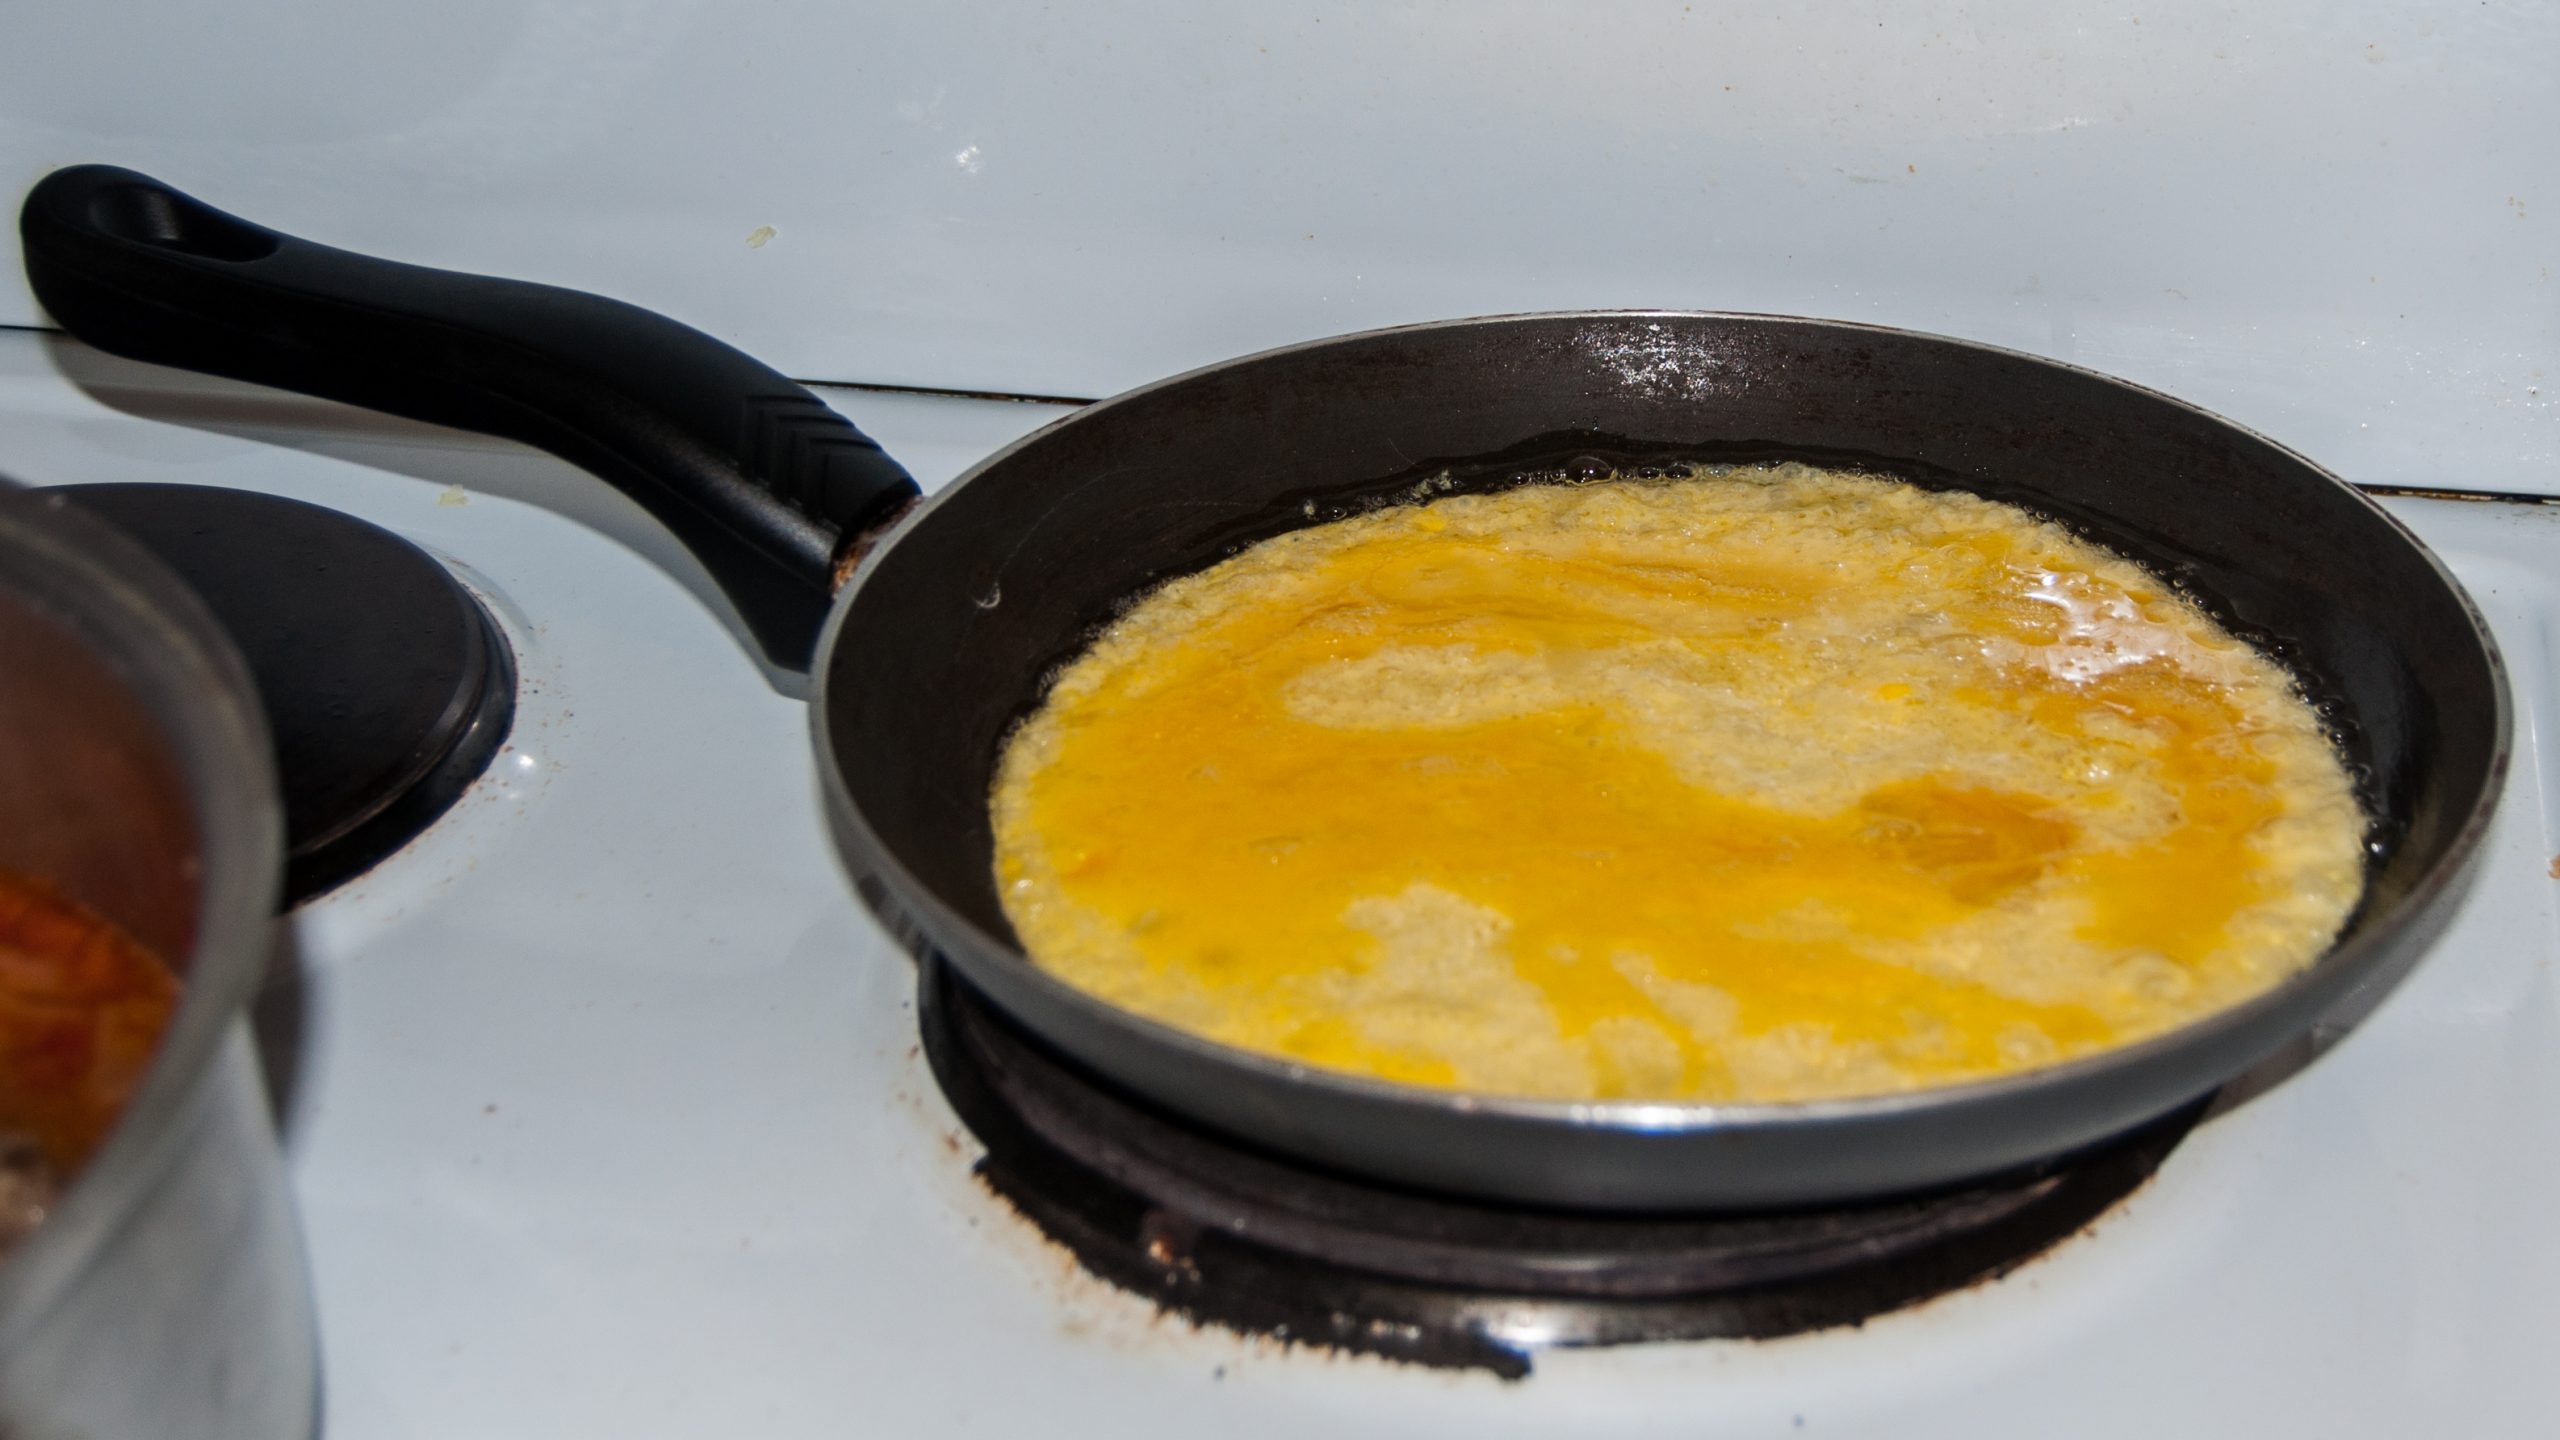 Top 5 Best Pans For Omelettes In 2022 (Buying Guide)